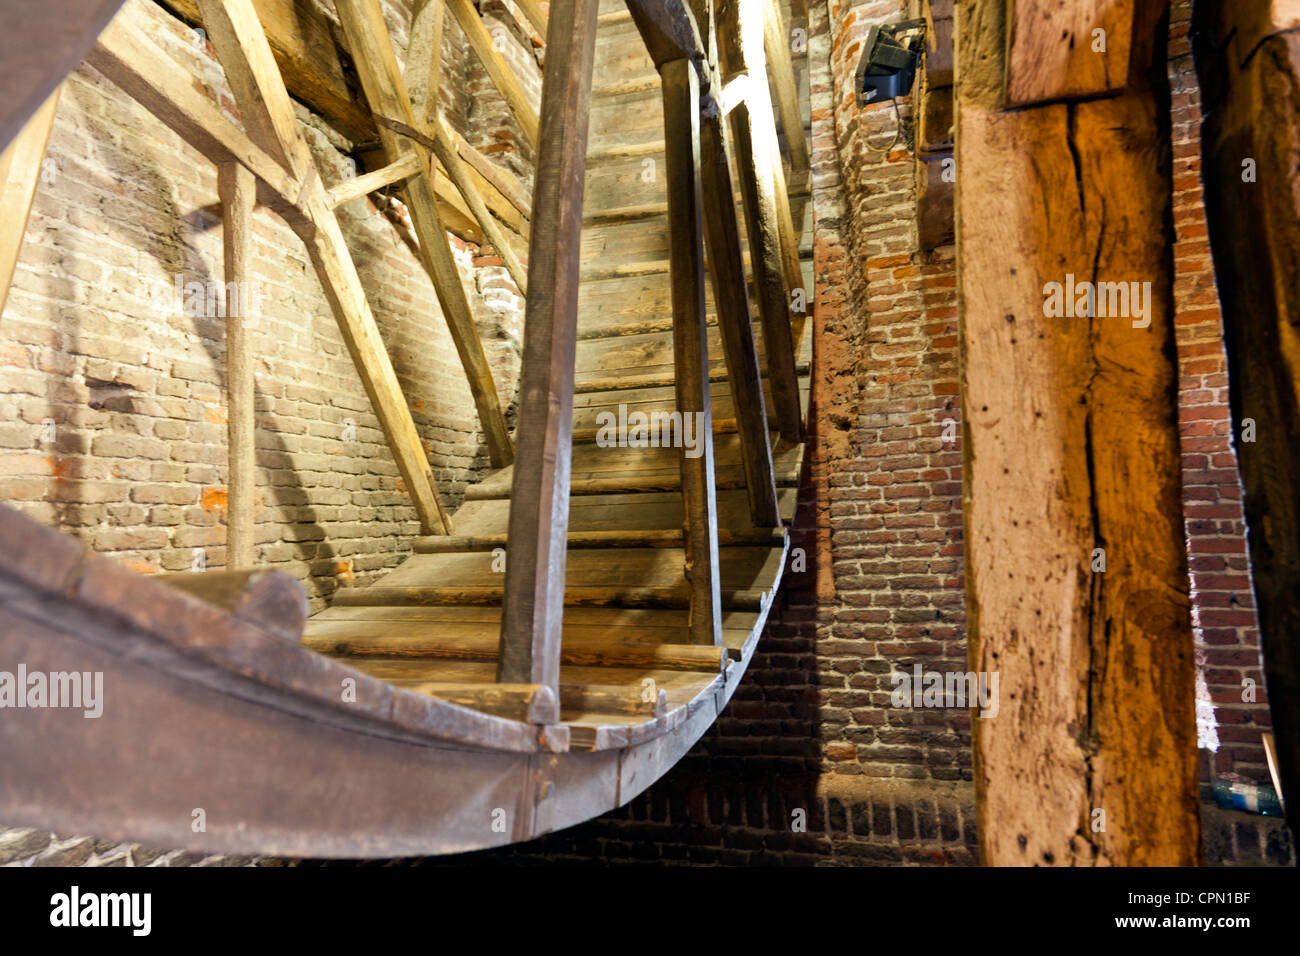 Amersfoort, The Netherlands: The huge wooden wheel inside the Koppelpoort, a medieval gate into the city. Stock Photo